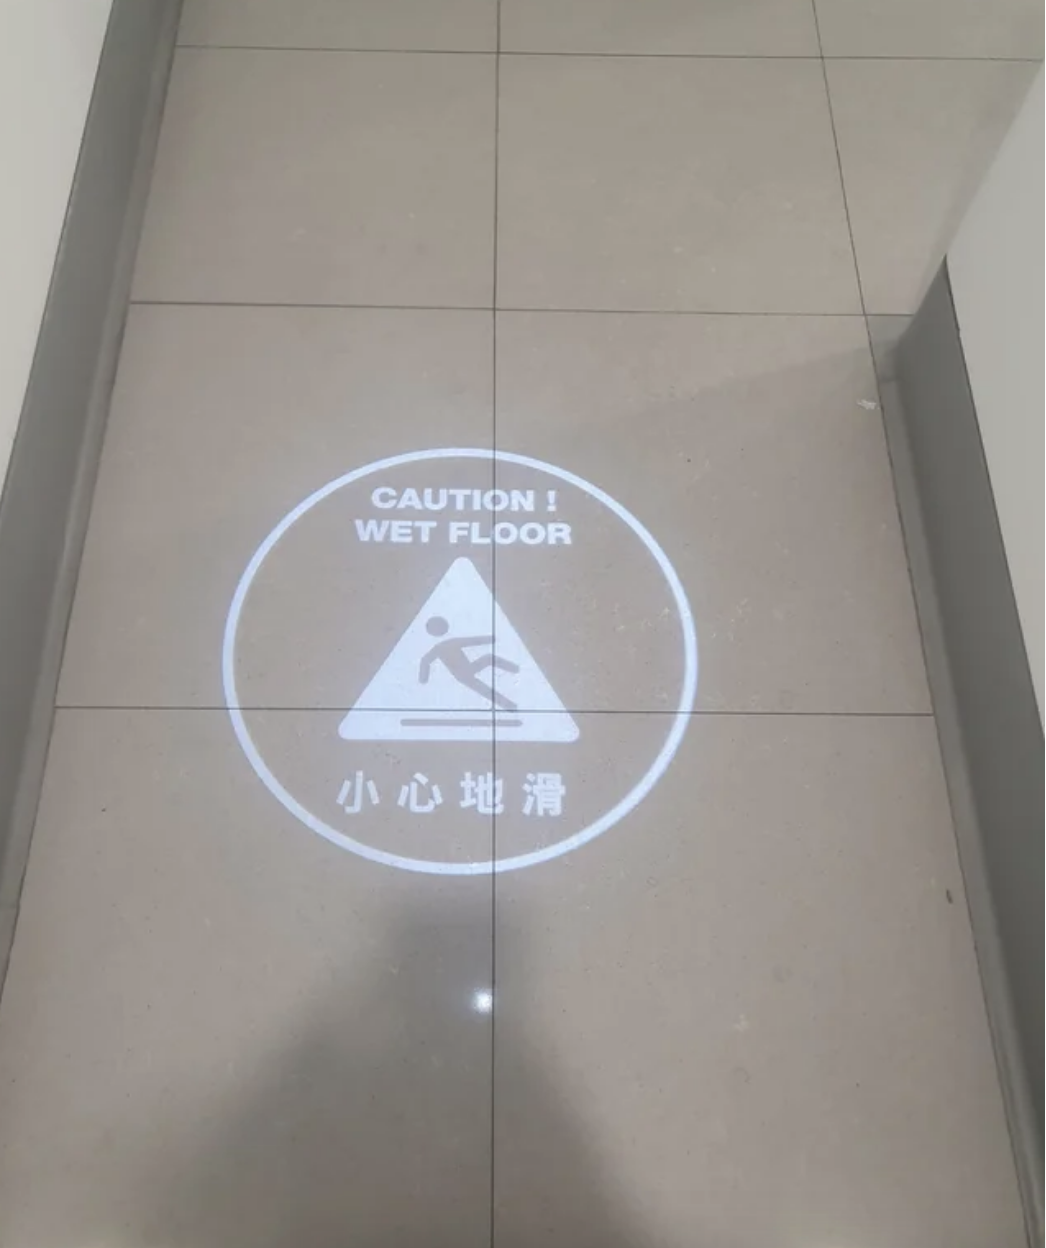 A light shines on the floor that says wet floor